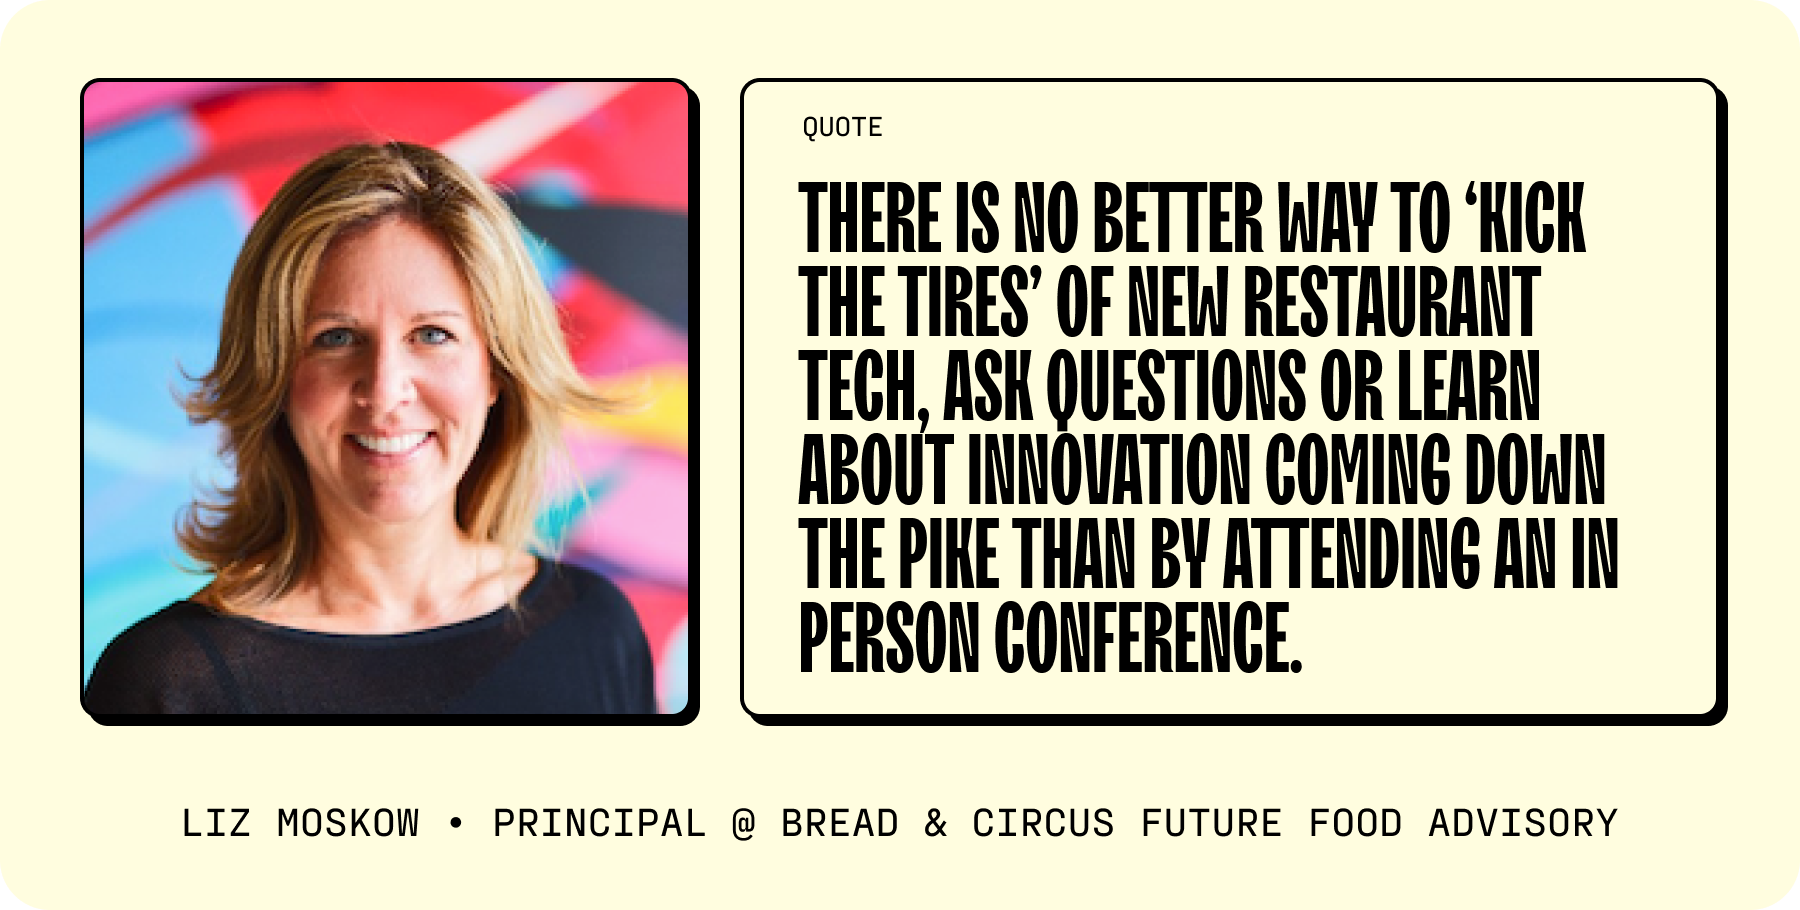 As Liz Moskow, Principal at Bread & Circus Future Food Advisory, puts it, “There is no better way to ‘kick the tires’ of new restaurant tech, ask questions or learn about innovation coming down the pike than by attending an in person conference.”